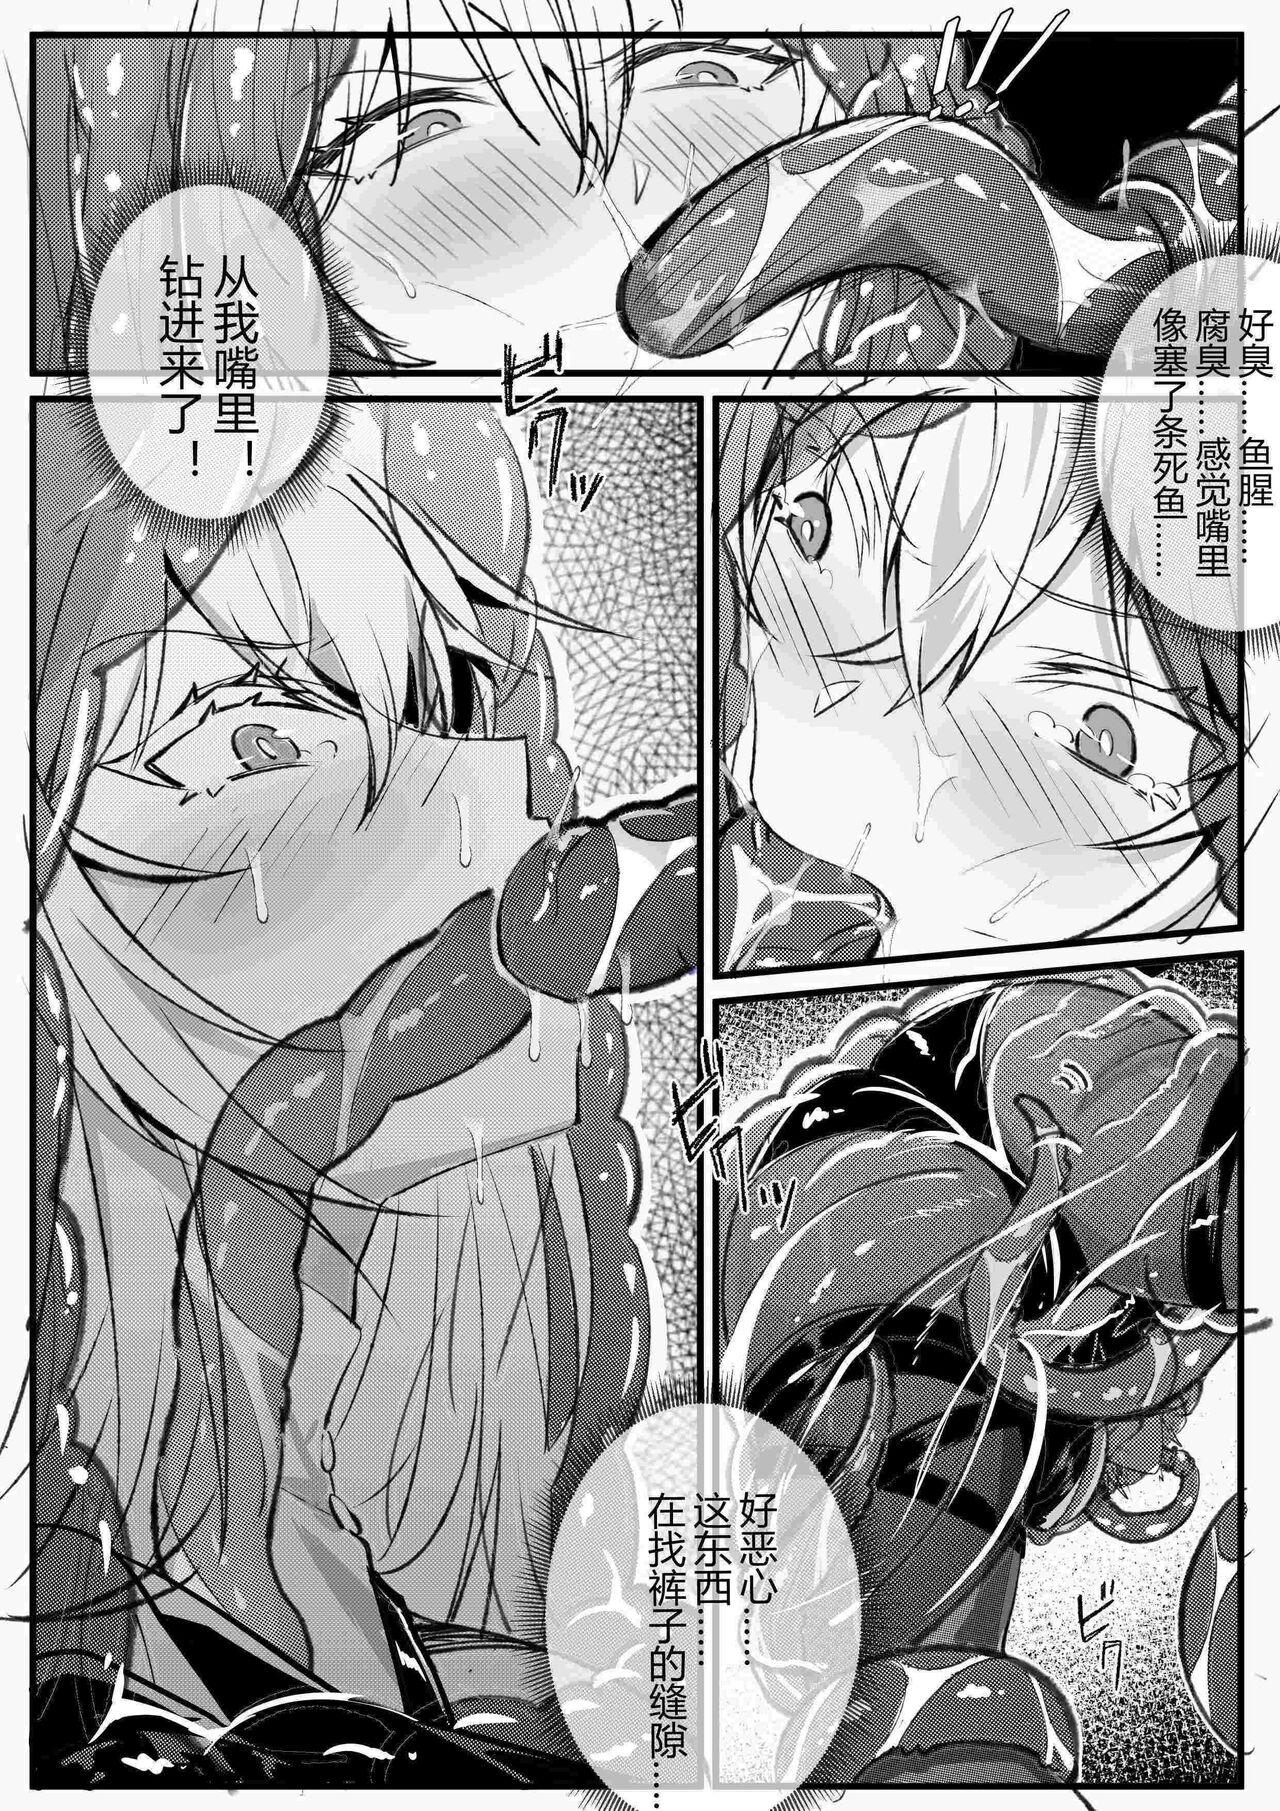 Girls Getting Fucked 劳伦缇娜的单人吞丸寄生作战记录 - Arknights Jap - Page 7